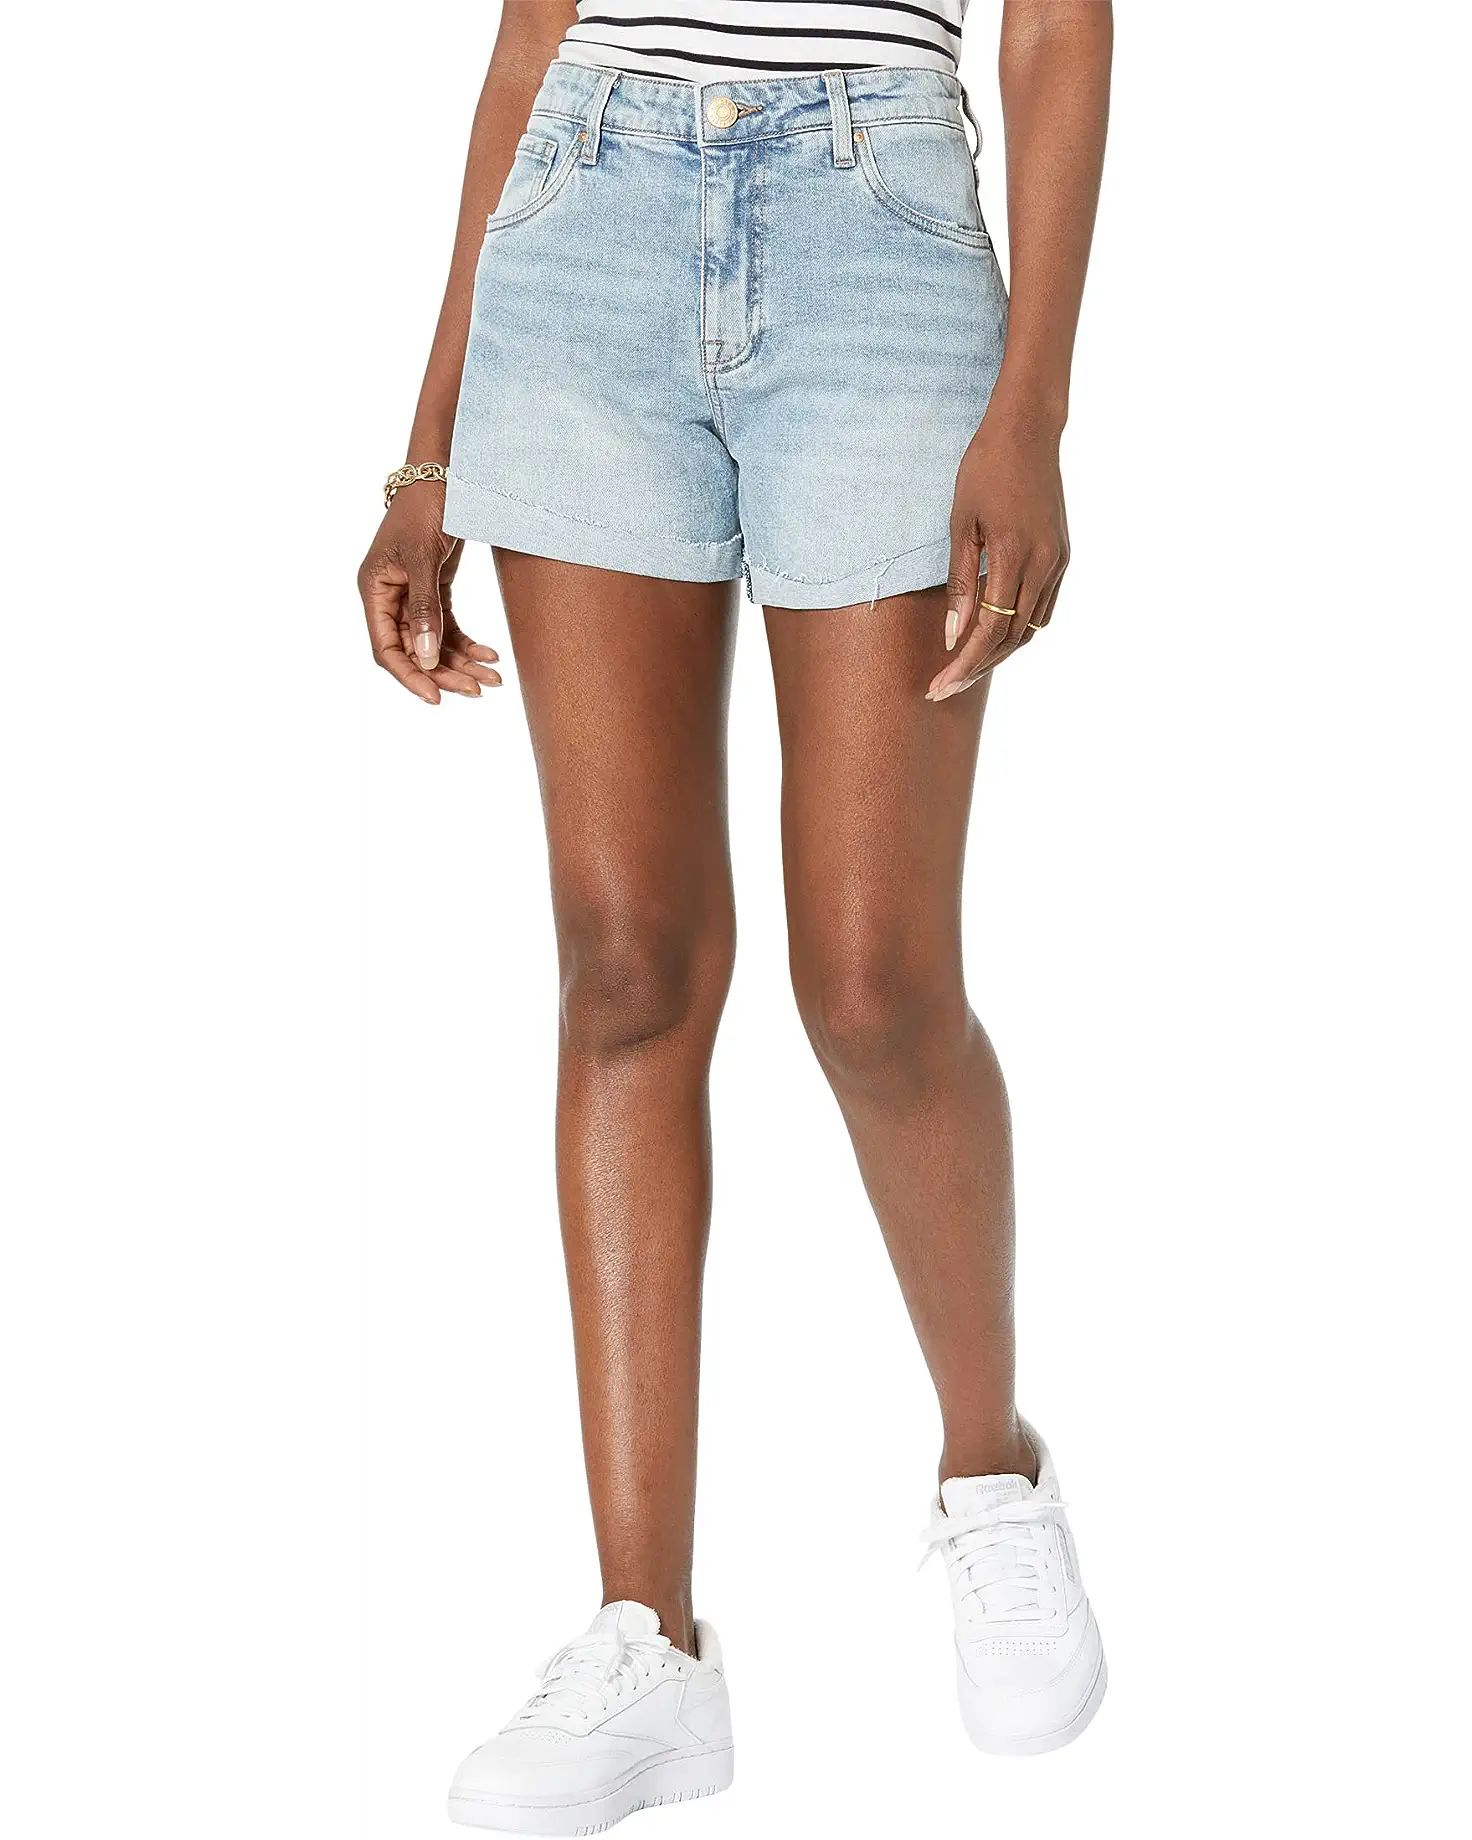 Jane High-Rise Shorts in Encourage | Zappos